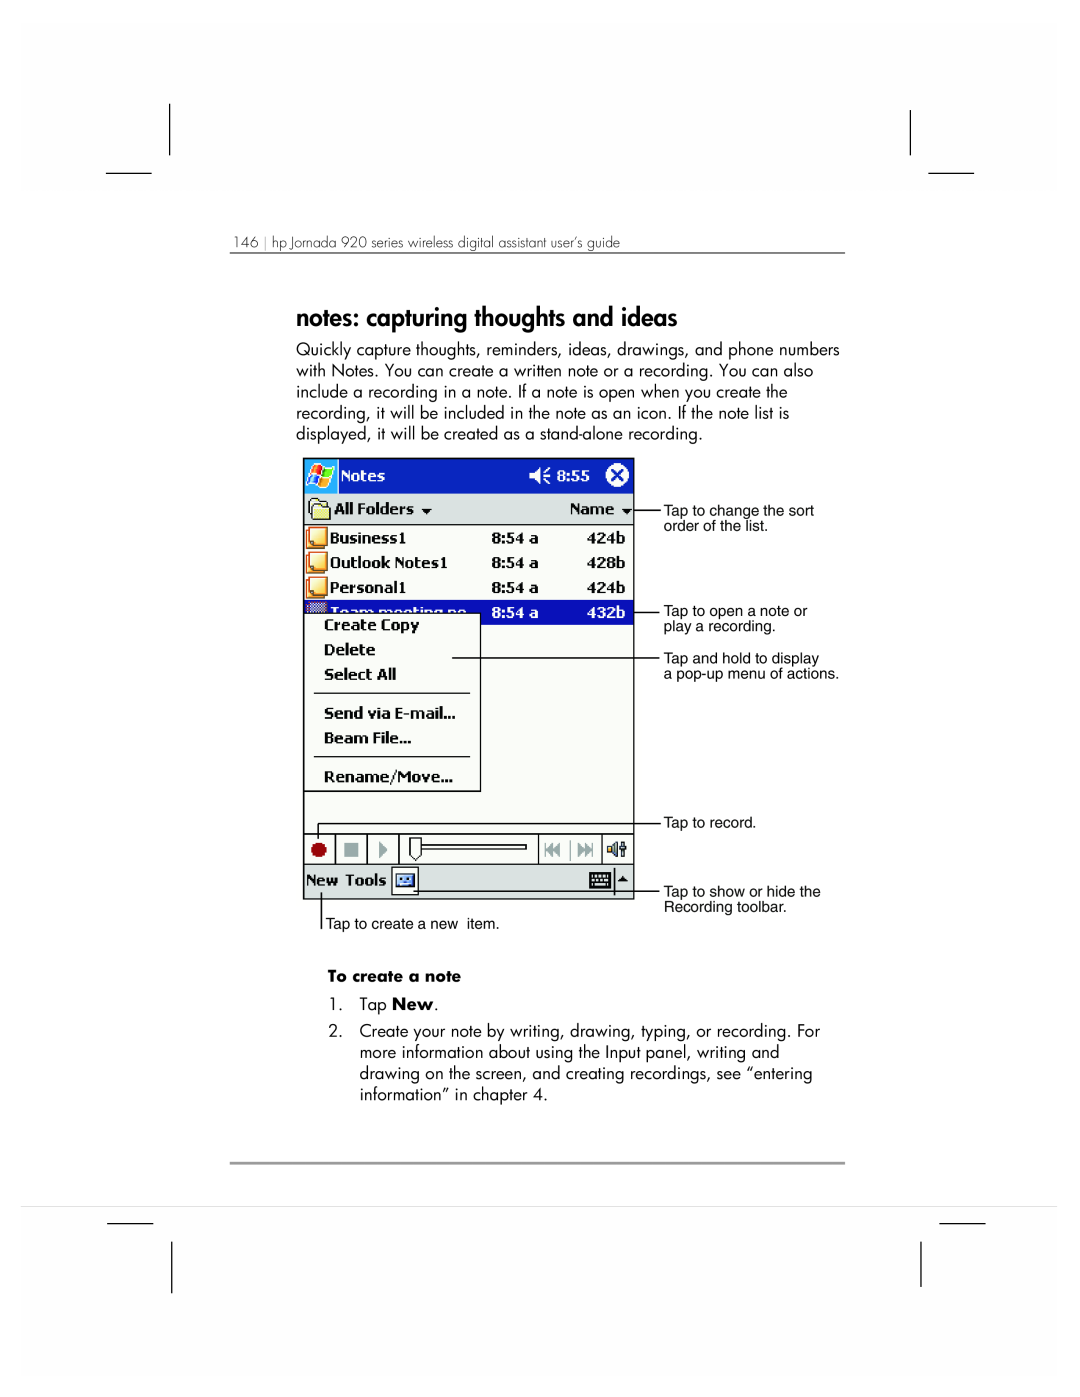 HP 920 manual notes capturing thoughts and ideas, To create a note 